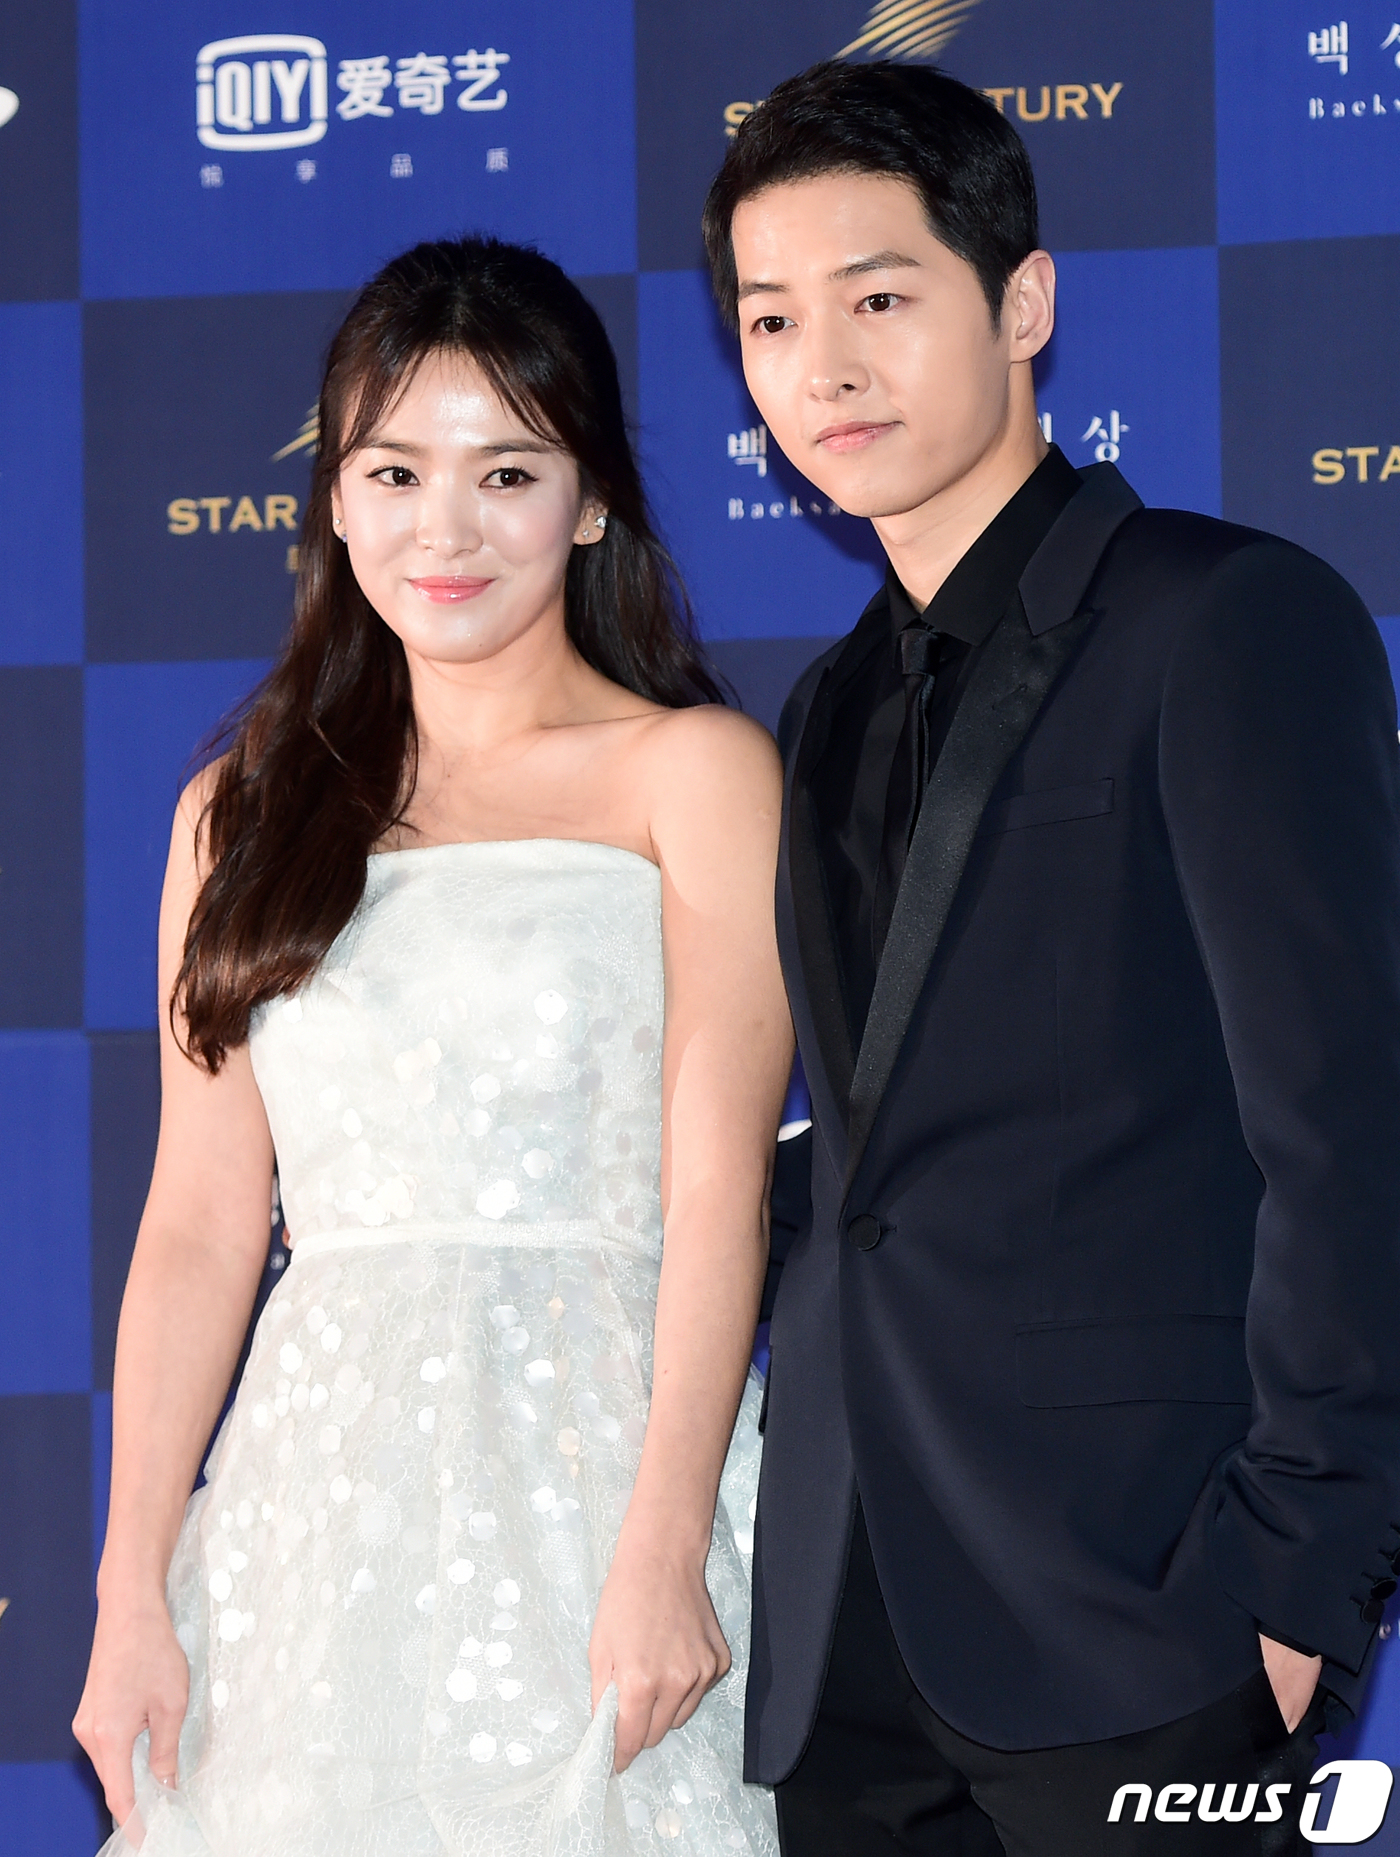 Seoul = = With various speculation and rumors abounding over the sudden divorce announcement by Actor Song Joong-ki (34) Song Hye-kyo (38), both sides and close aides are wary of these rumors and have stated that they will conclude the divorce proceedings smoothly between them.On the morning of the 27th, it was reported that Song Joong-ki Song Hye-kyo couple were going through divorce proceedings.At 9 am, Song Joong-kis lawyer, Park Jae-hyun, of the law firm Plaza, announced that Song Joong-ki filed a divorce settlement application to the Seoul Family Court on the 26th.Song Joong-ki said through a legal representative, I am sorry to tell you that I am sorry to give bad news to many people who love and care for me. I went through the mediation process for divorce with Song Hye-kyo Both of them are hoping to finish the divorce process smoothly rather than blame each other for the wrong thing, he added.Song Hye-kyo is in the process of divorce after careful consideration with her husband, said Song Hye-kyos agency UAA. The reason is that the two sides have not overcome the differences of their personality and have made such a decision inevitably.Song Joong-ki and Song Hye-kyo met as actors starring KBS 2TV drama Dawn of the Sun which was broadcast in 2016, and developed into lovers and married at the end of October 2017.It was called the wedding of the century which was a meeting of top stars who enjoyed high popularity overseas and was a couple of popular dramas of the time, Dawn of the Sun, which was concentrated not only in Korea but also Asian Korean Wave fans.However, since late last year, there have been rumors that the relationship between the two has been detected in the entertainment industry. In fact, Chinese media have raised the issue of whether or not they wear a wedding ring.In this case, Song Hye-kyo was dismissed at the TVN Boyfriend production presentation last November and Song Joong-ki at the TVN Asdal Chronicle production presentation in May, a month ago.As high as the high awareness of the two, there are many speculations about divorce as much as the topic of the marriage announcement that was buzzing here.In particular, Song Joong-ki reported the divorce news before the TVN Asdal Chronicle, which is currently appearing, was the cause of more words, and the time difference between the two sides was different from the marriage announcement.An official from both sides said on the 27th, It was the contents that both sides shared with each other, and it was not meaningful that the time of announcement of the position of both sides was different.My husband, Song Joong-ki, first made his position, and Song Hye-kyo only followed it. Some media reported that it was a divorce with a reason for a reason, not a personality difference. If there is a reason for a reason, I sued, and the two sides agreed to proceed with the divorce process.The two sides are keenly watching various rumors and jirashi related to divorce. Although they have not yet set up a specific response plan, they may change their position after watching the situation.However, Blossom Entertainment is in a position to respond hard to Jirashi, whose actor Park Bo-gum is mentioned.